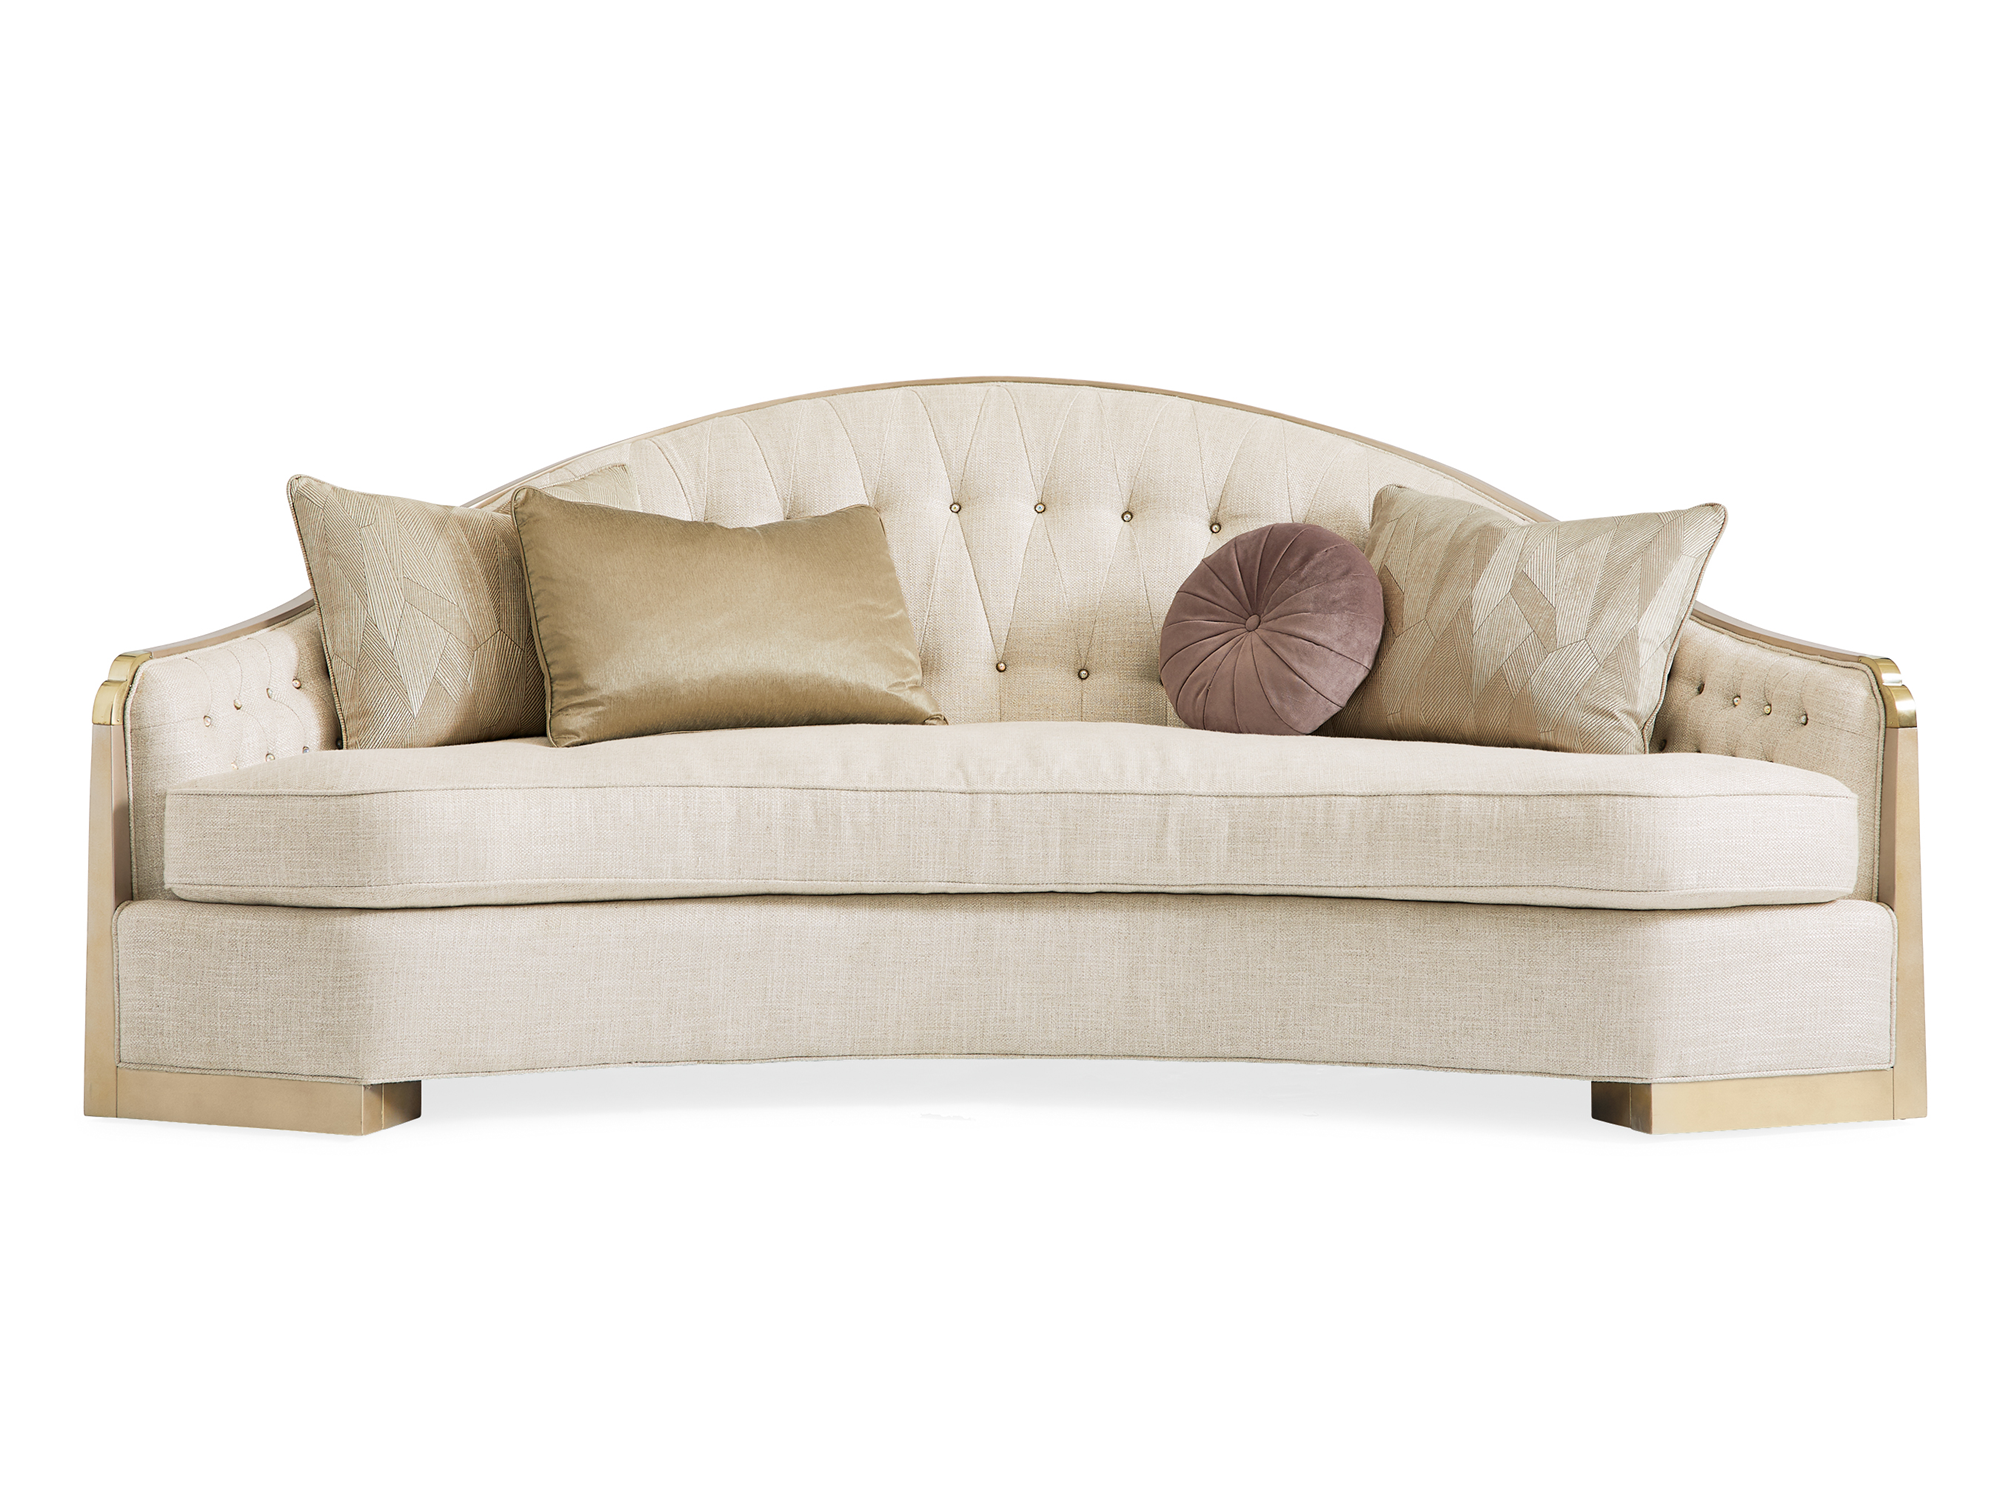 Desmond She's a Charmer Sofa in Warm Reflections - Euro Living Furniture